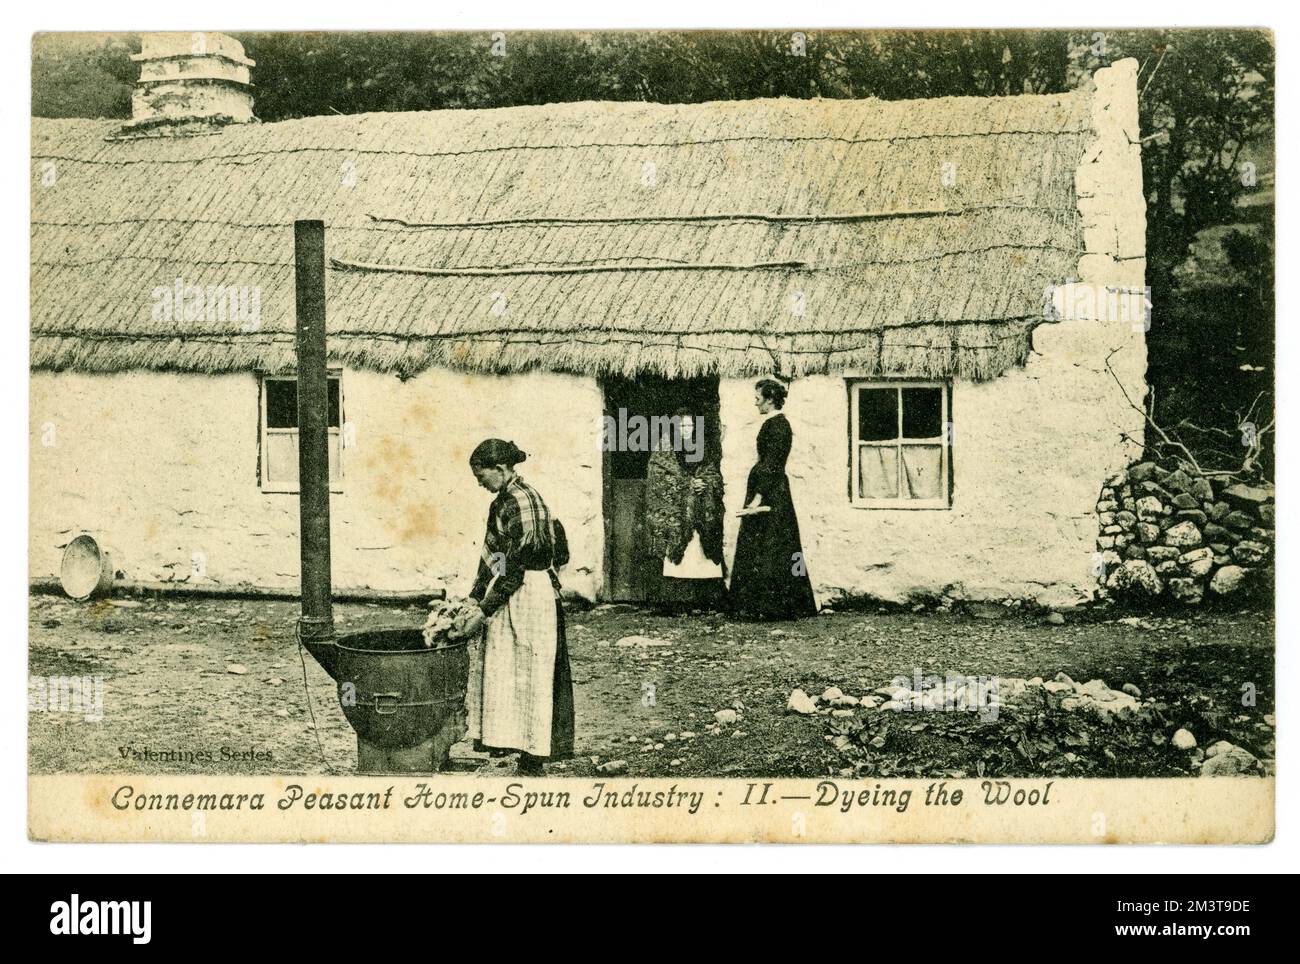 Original Edwardian era greetings postcard of peasant home-spun industry. Dyeing the Wool. outside a rustic cottage home, vernacular architecture built of local stone and roofing of reeds. Connemara, Galway, Republic of Ireland. Circa 1905. Stock Photo